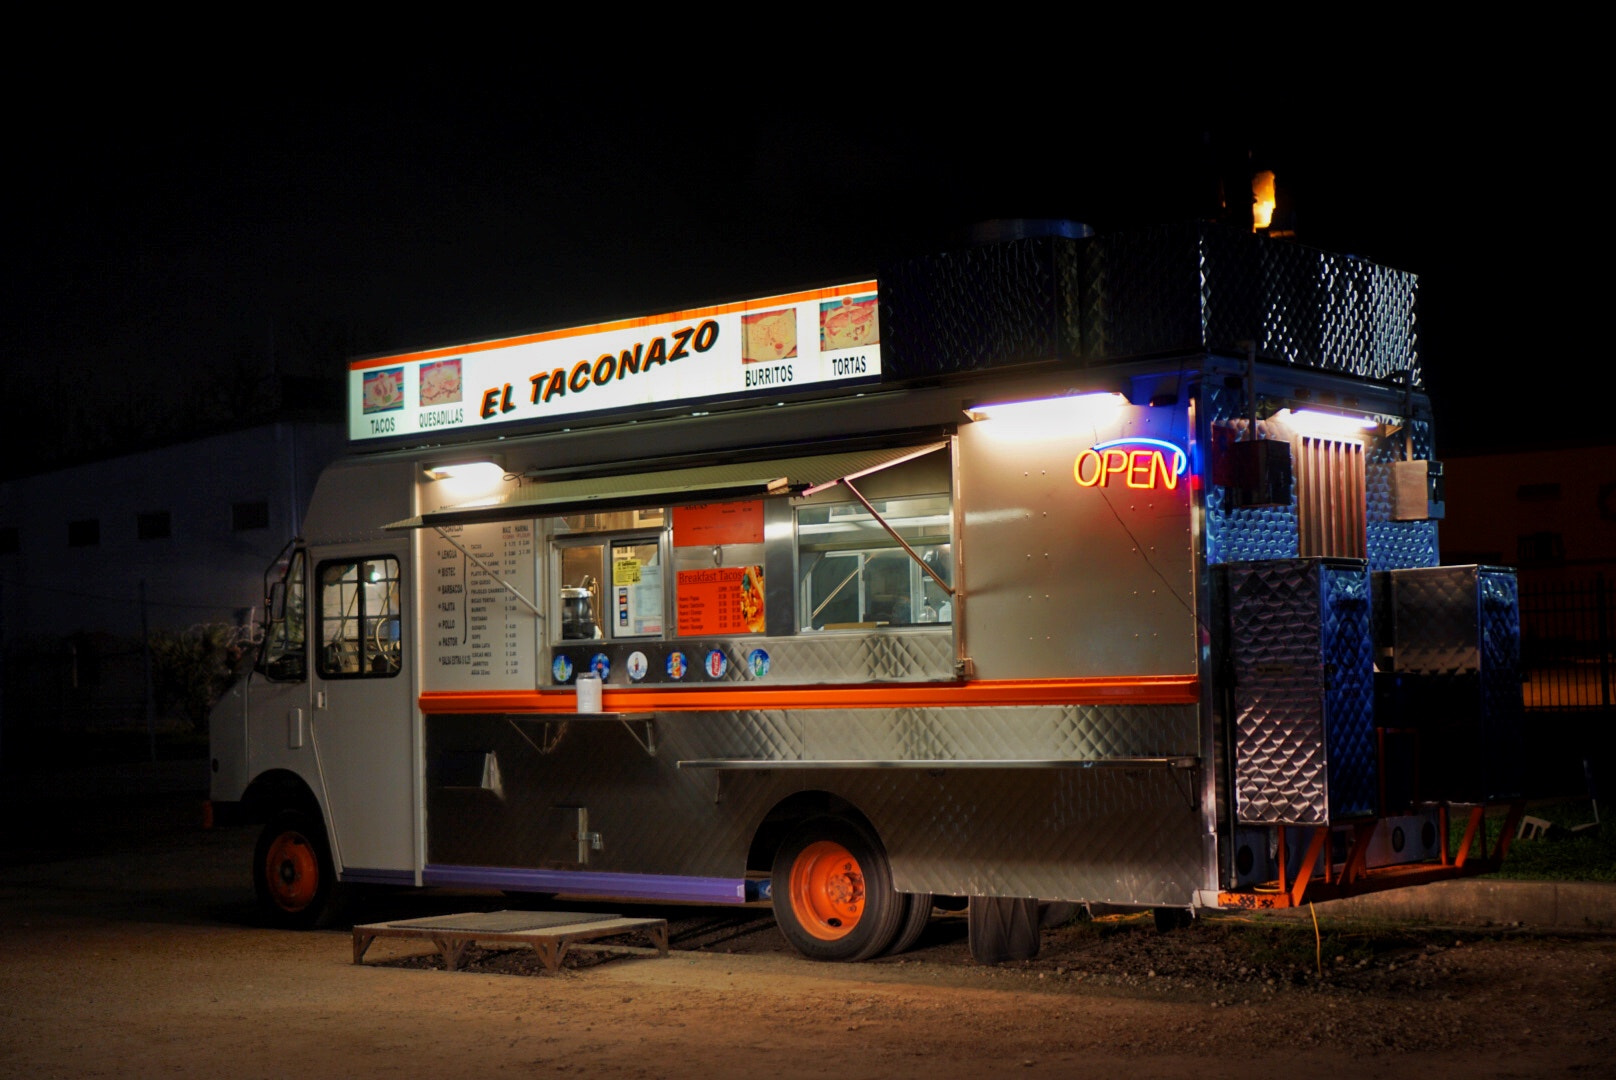 Sony a6300 sample photo. My favorite taco truck! photography